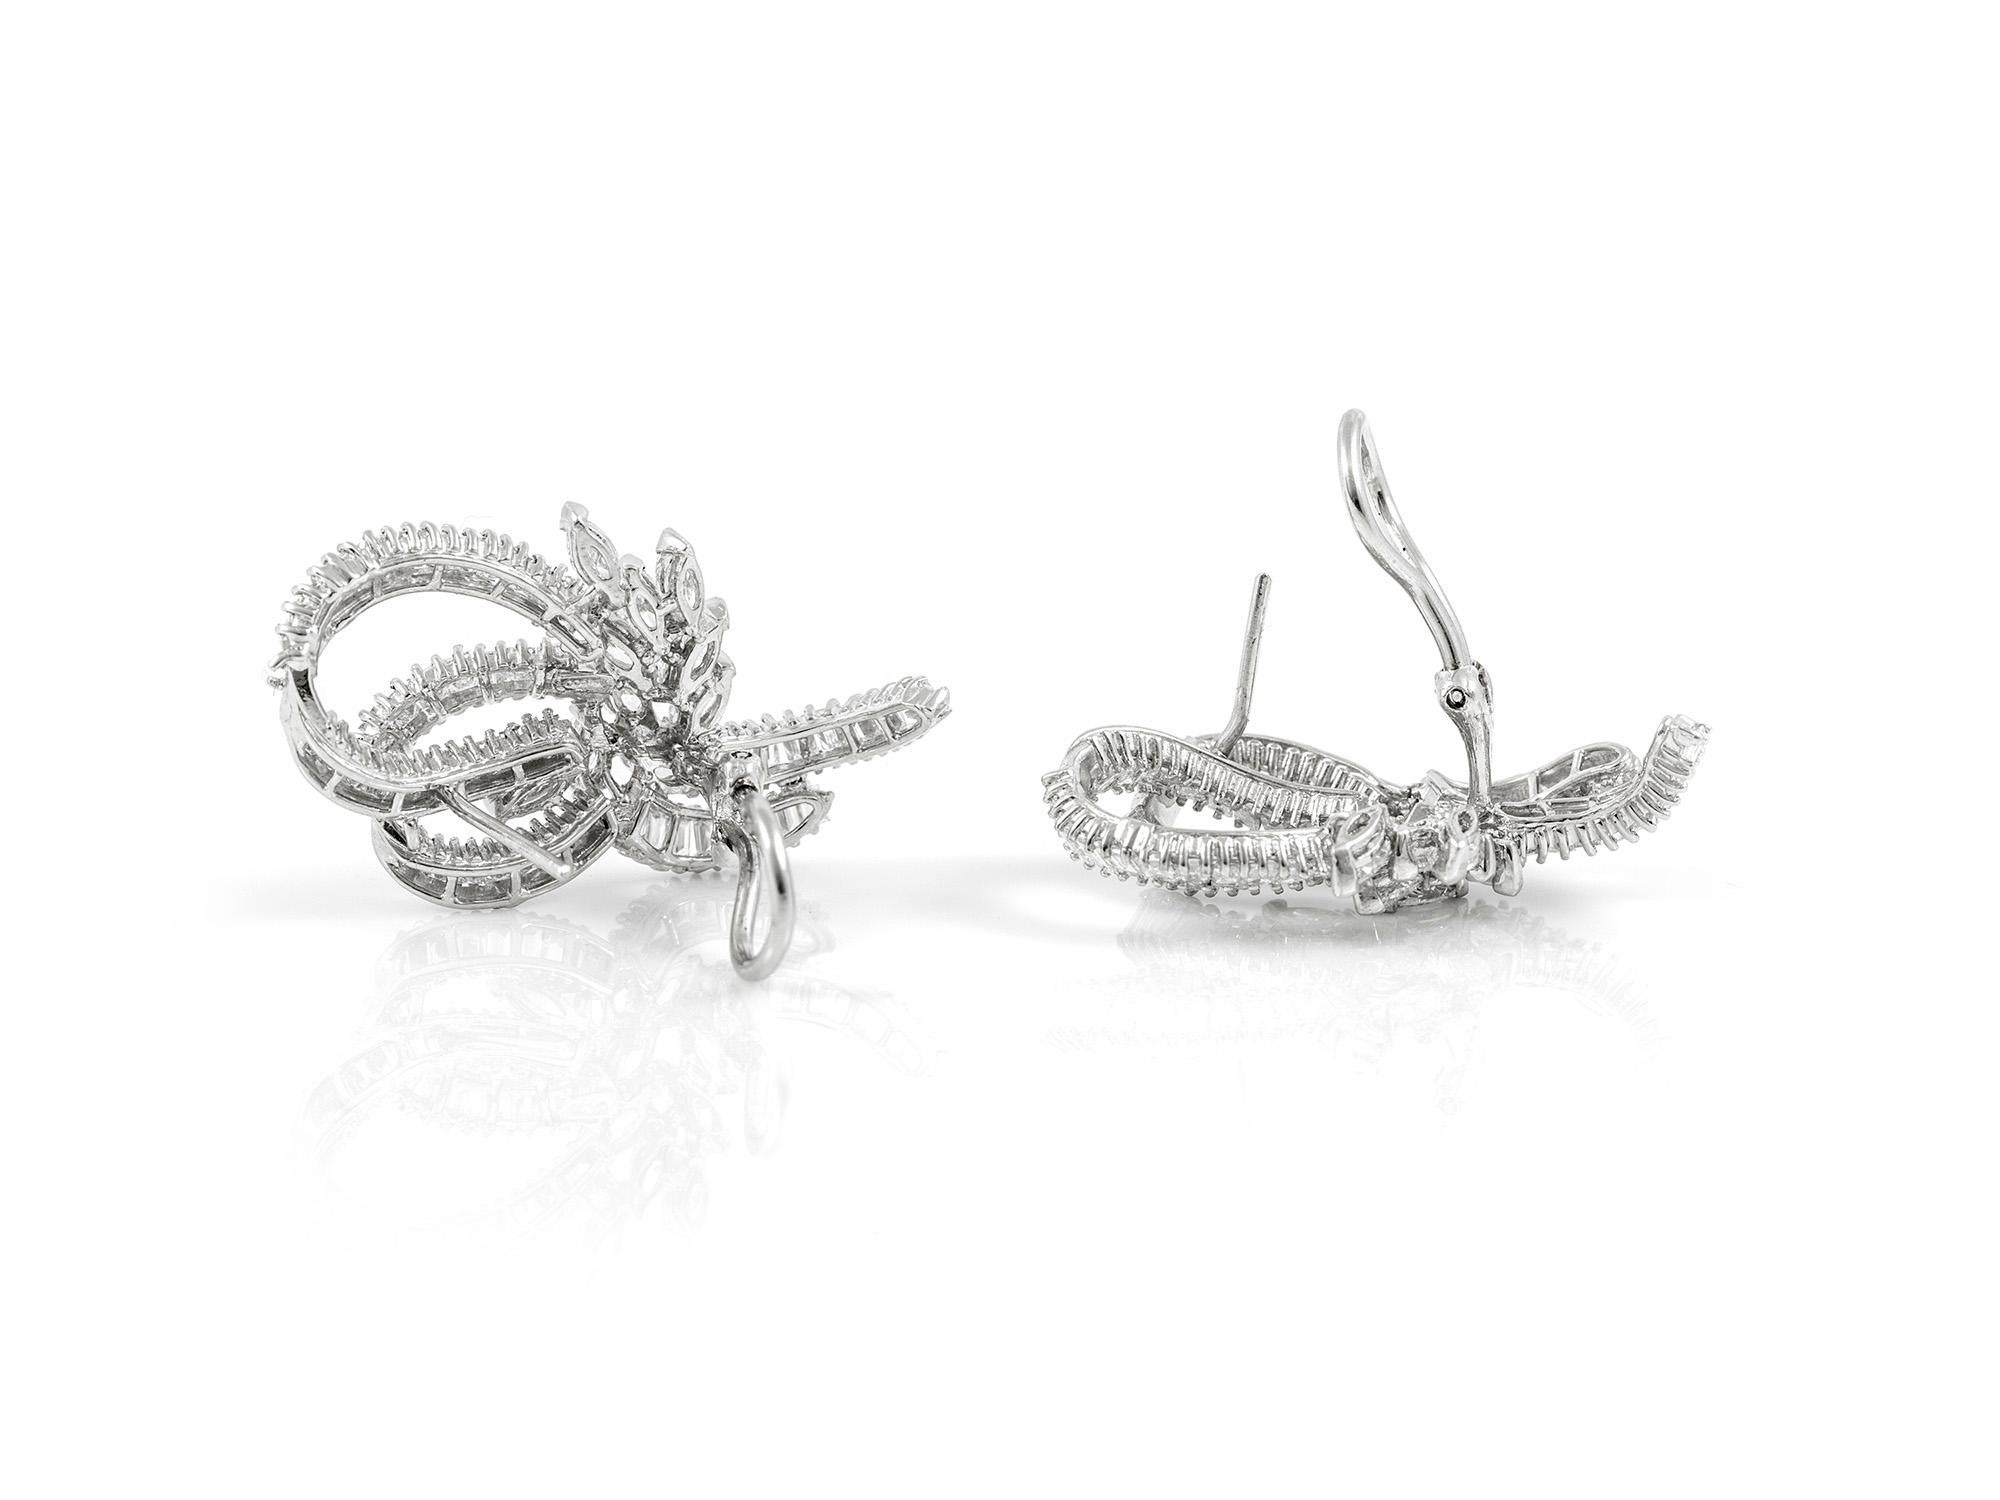 The earrings are finely crafted in platinum with different diamonds cut weighing approximately total of 8.12 carat.